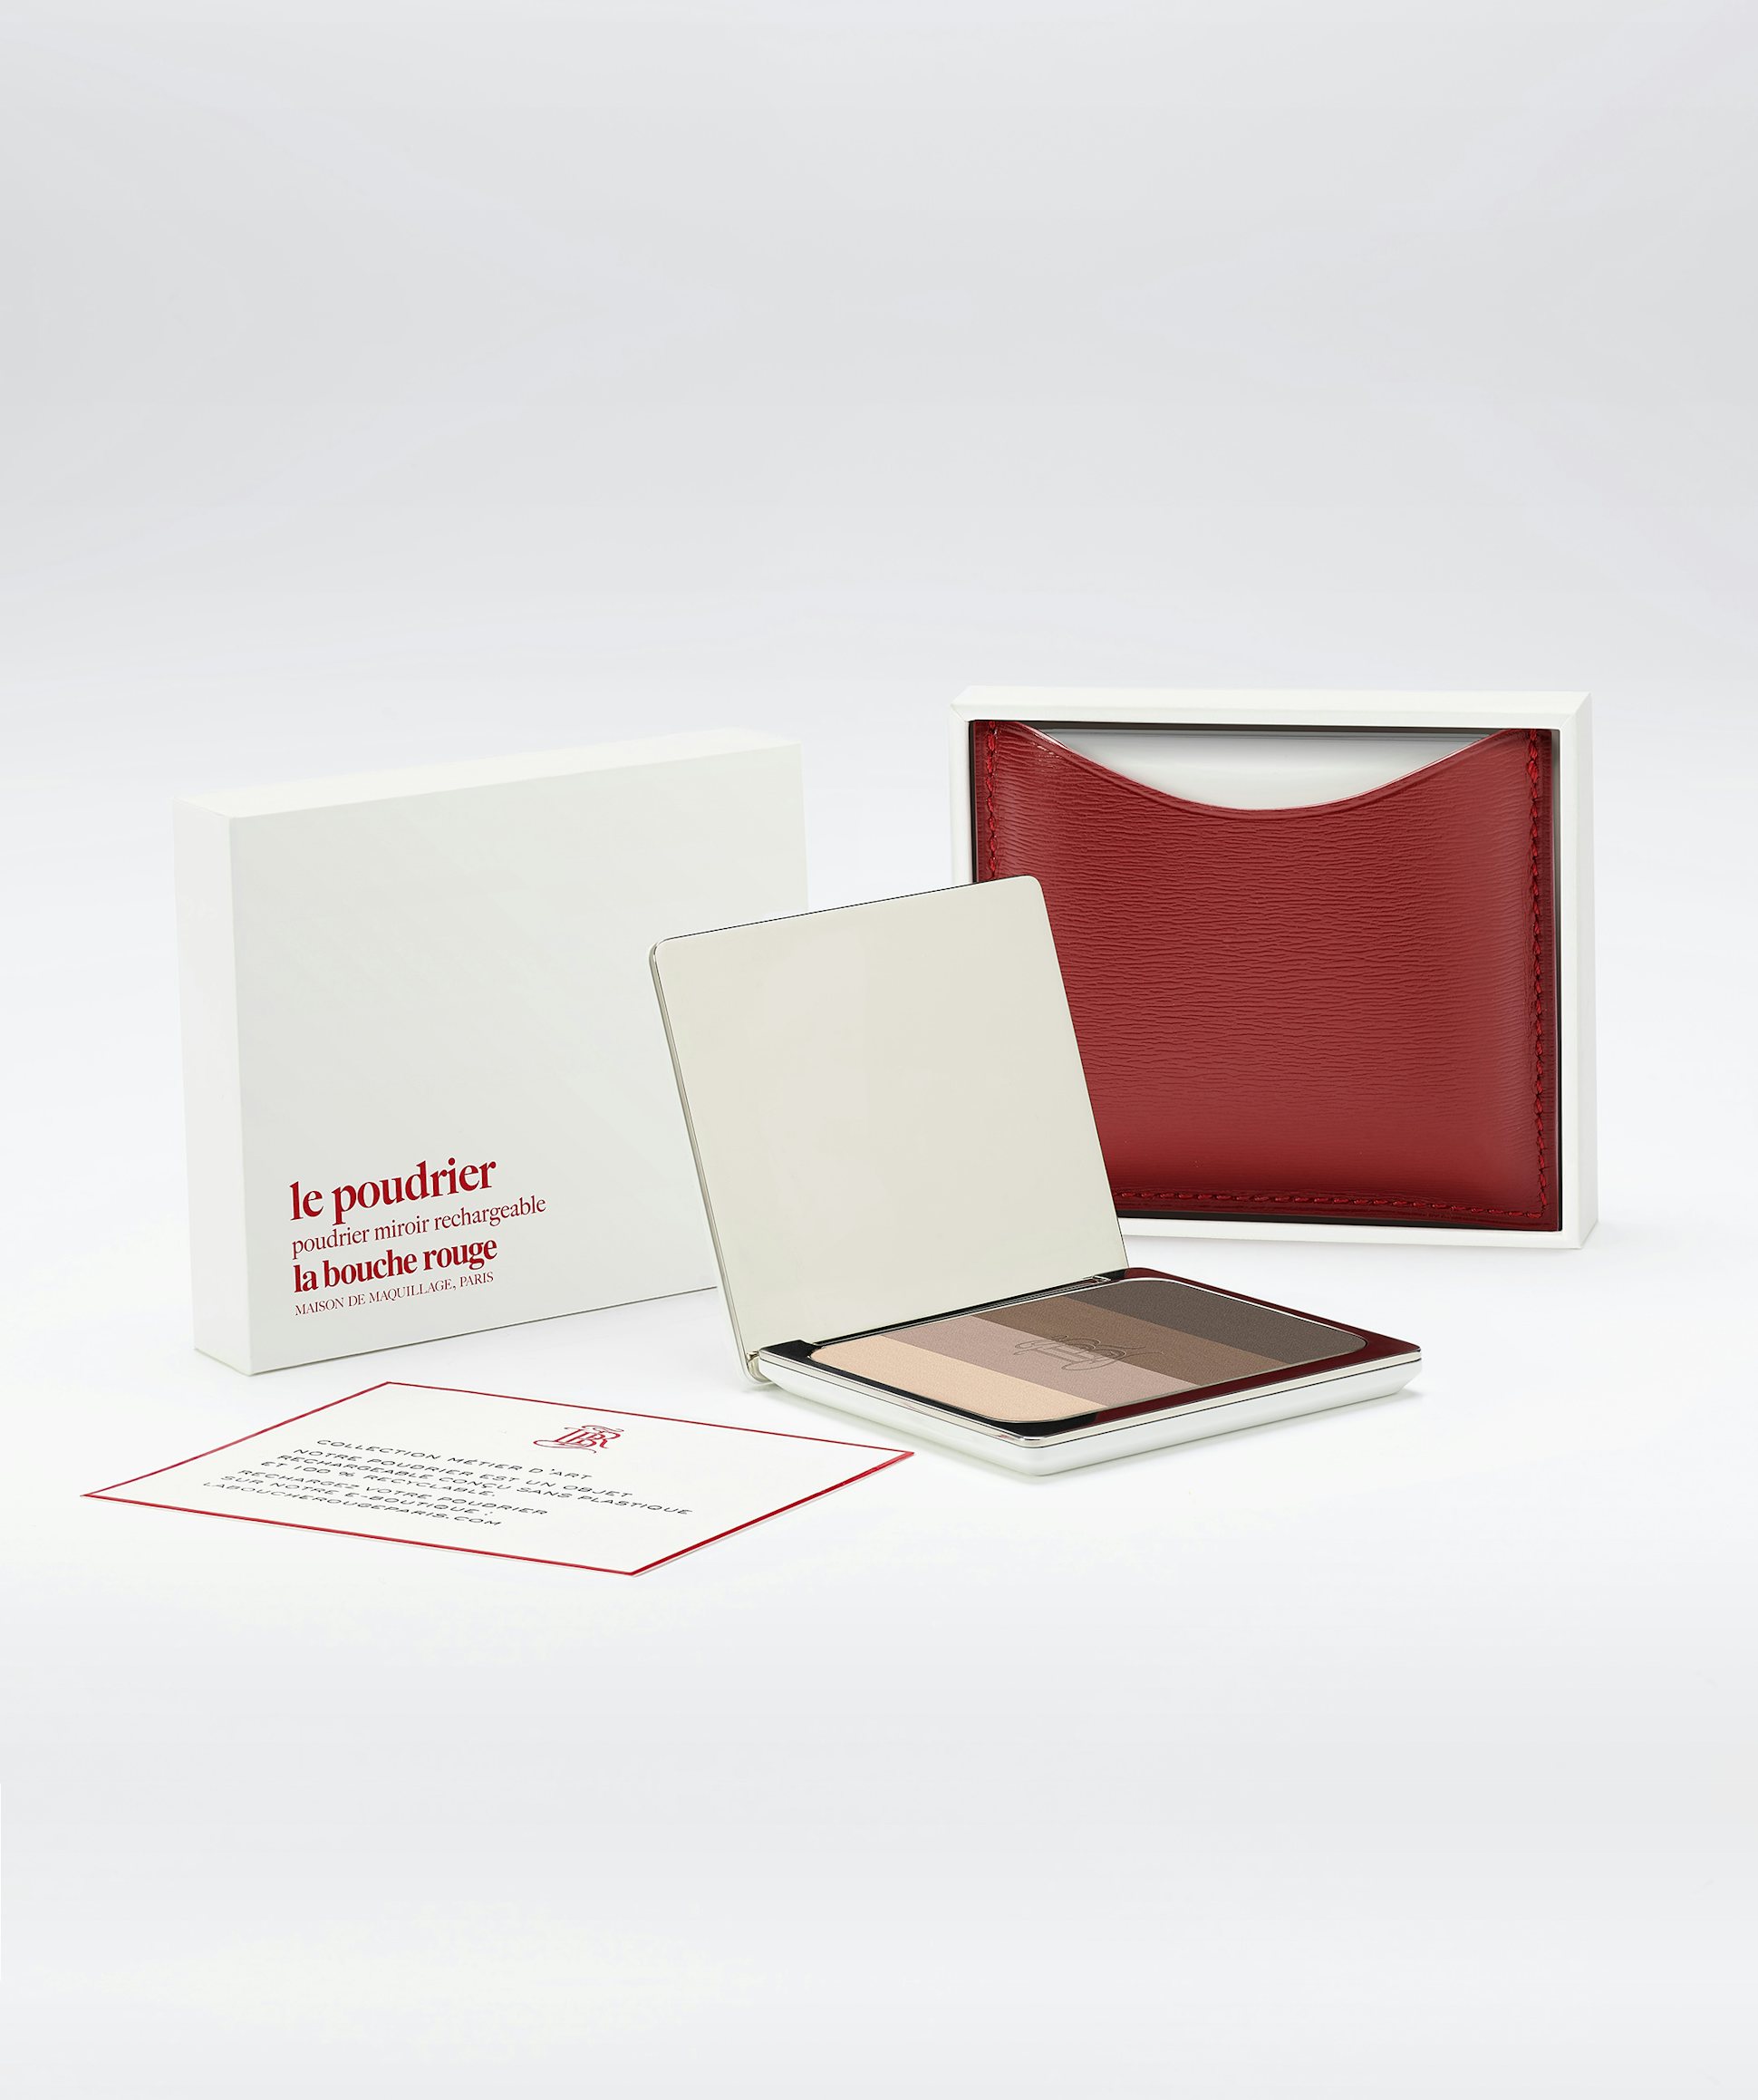 La bouche rouge, Paris Les Ombres Tage in the red fine leather compact case